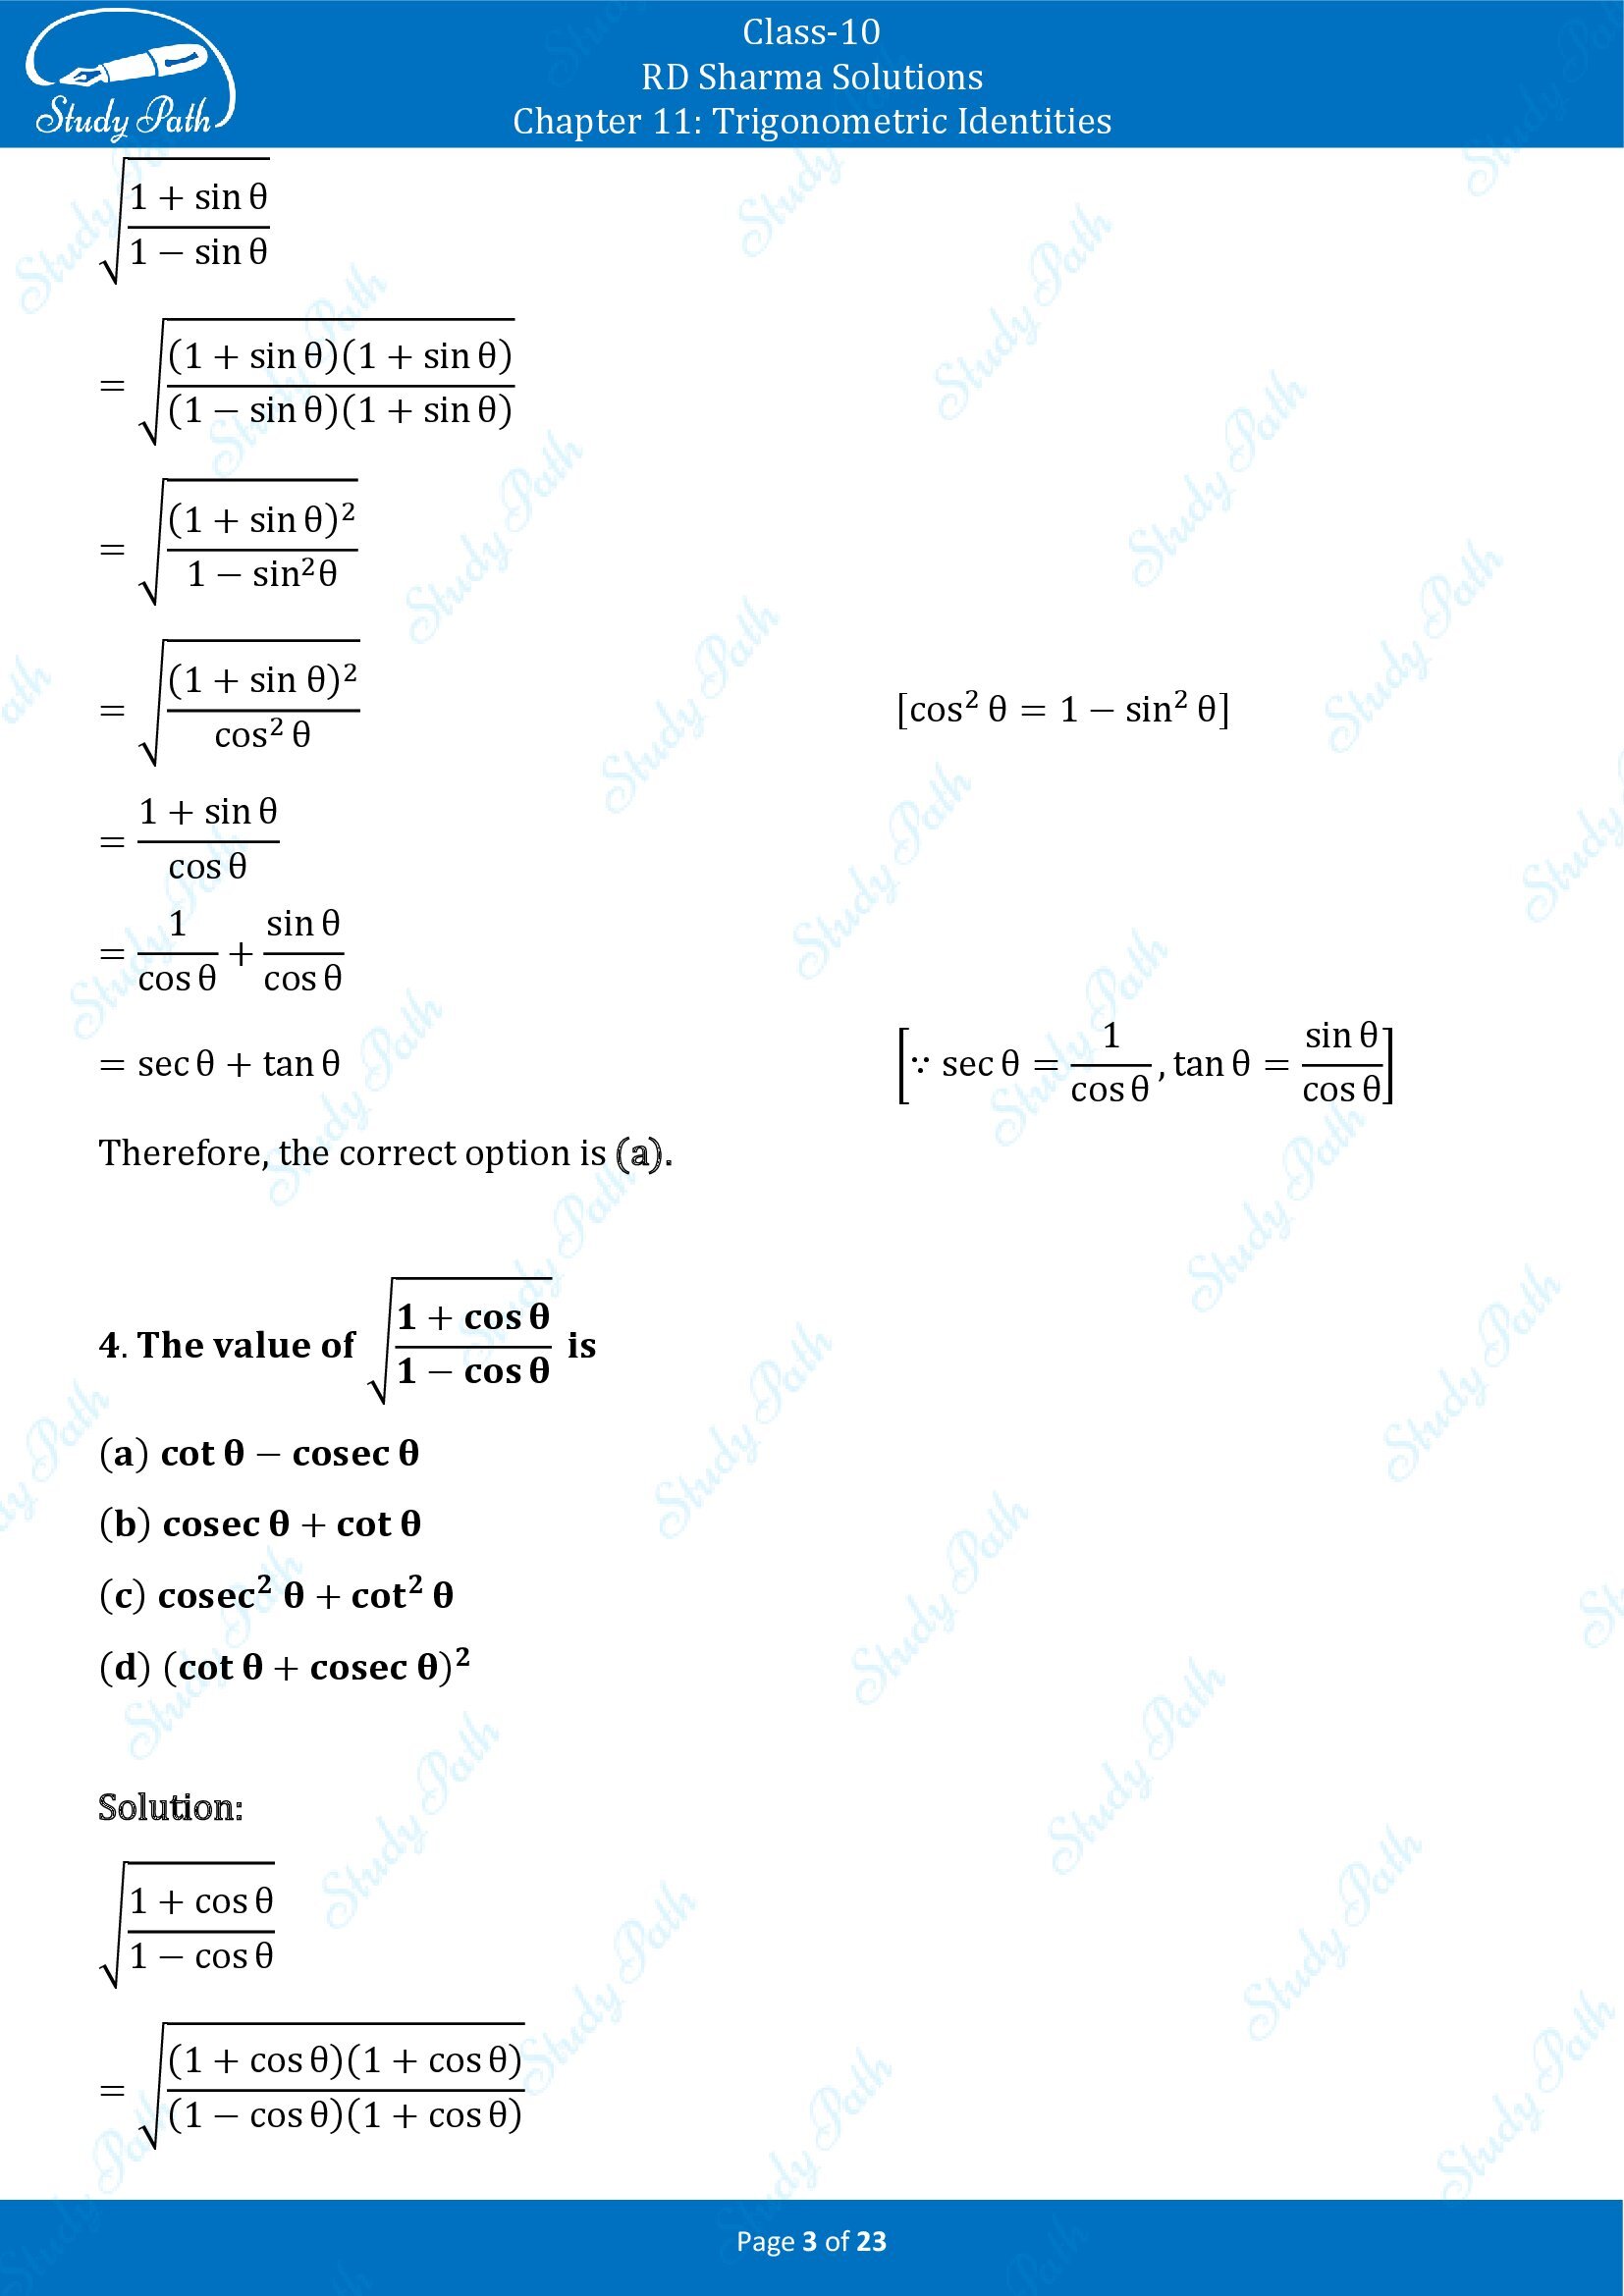 RD Sharma Solutions Class 10 Chapter 11 Trigonometric Identities Multiple Choice Questions MCQs 00003